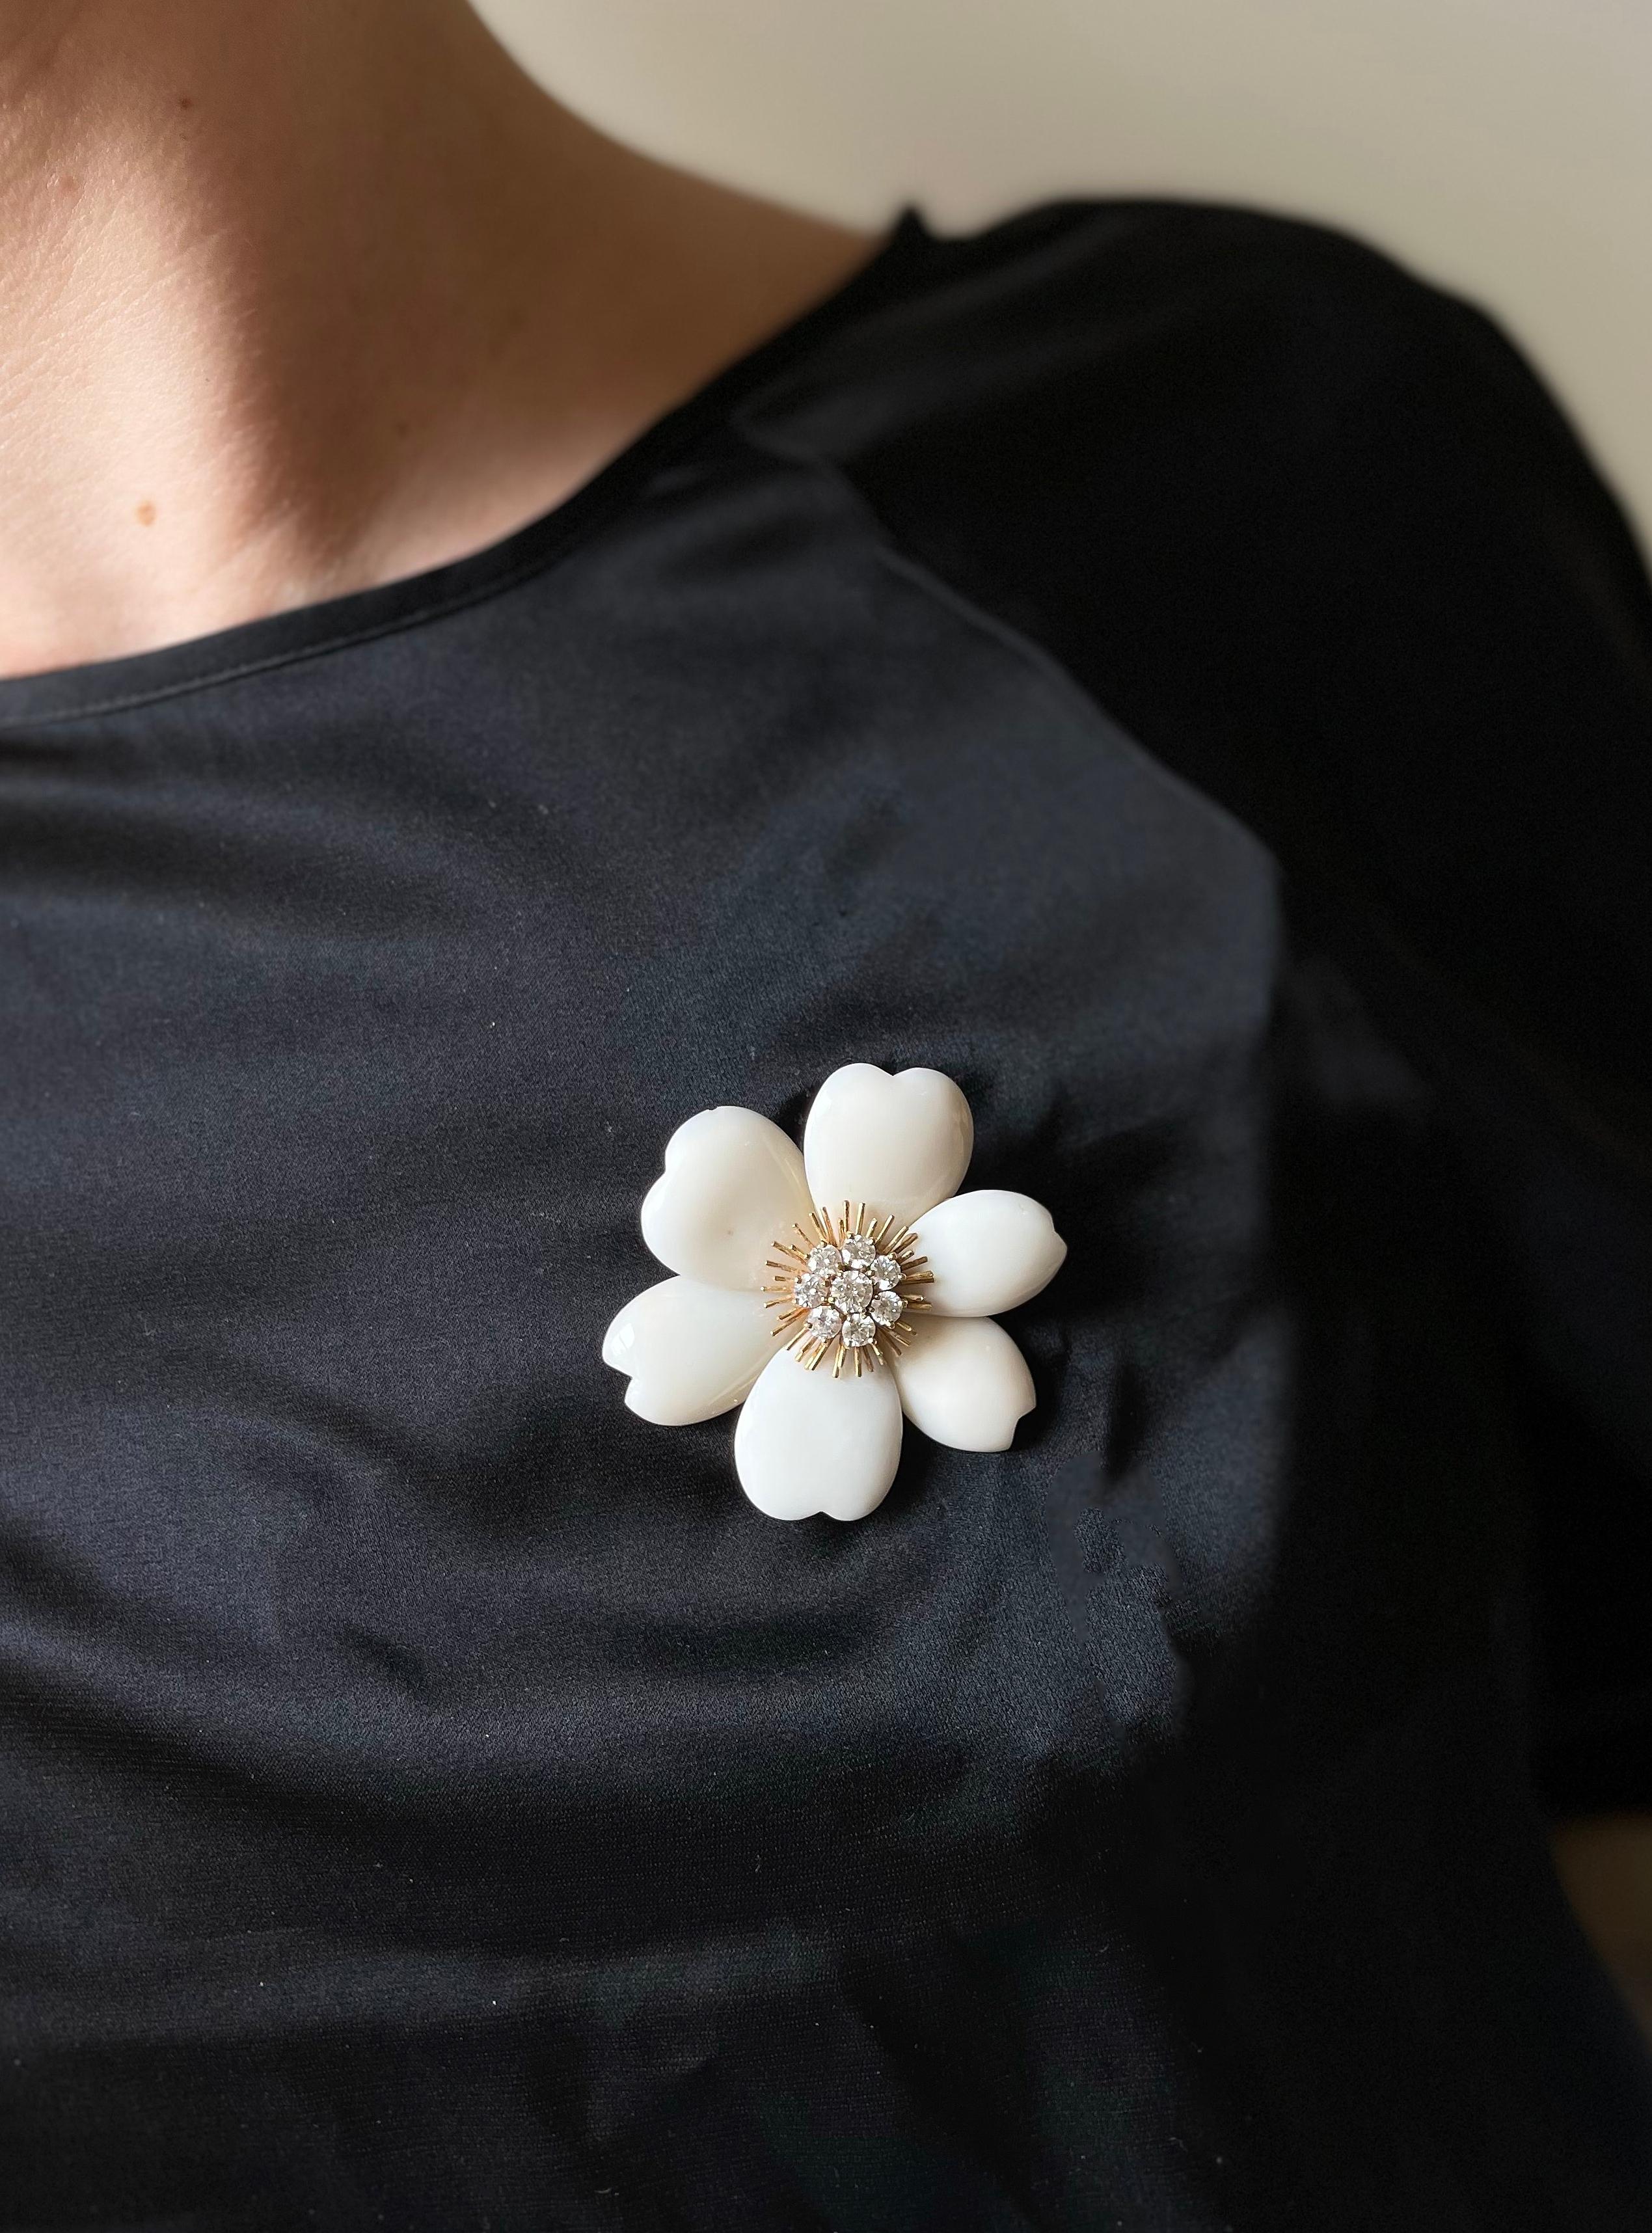 Classic and delicate clematis flower brooch by Van Cleef & Arpels, set with six angel skin coral petals, and approx. 1.75ctw in FG/VVS diamonds. Brooch measures 2